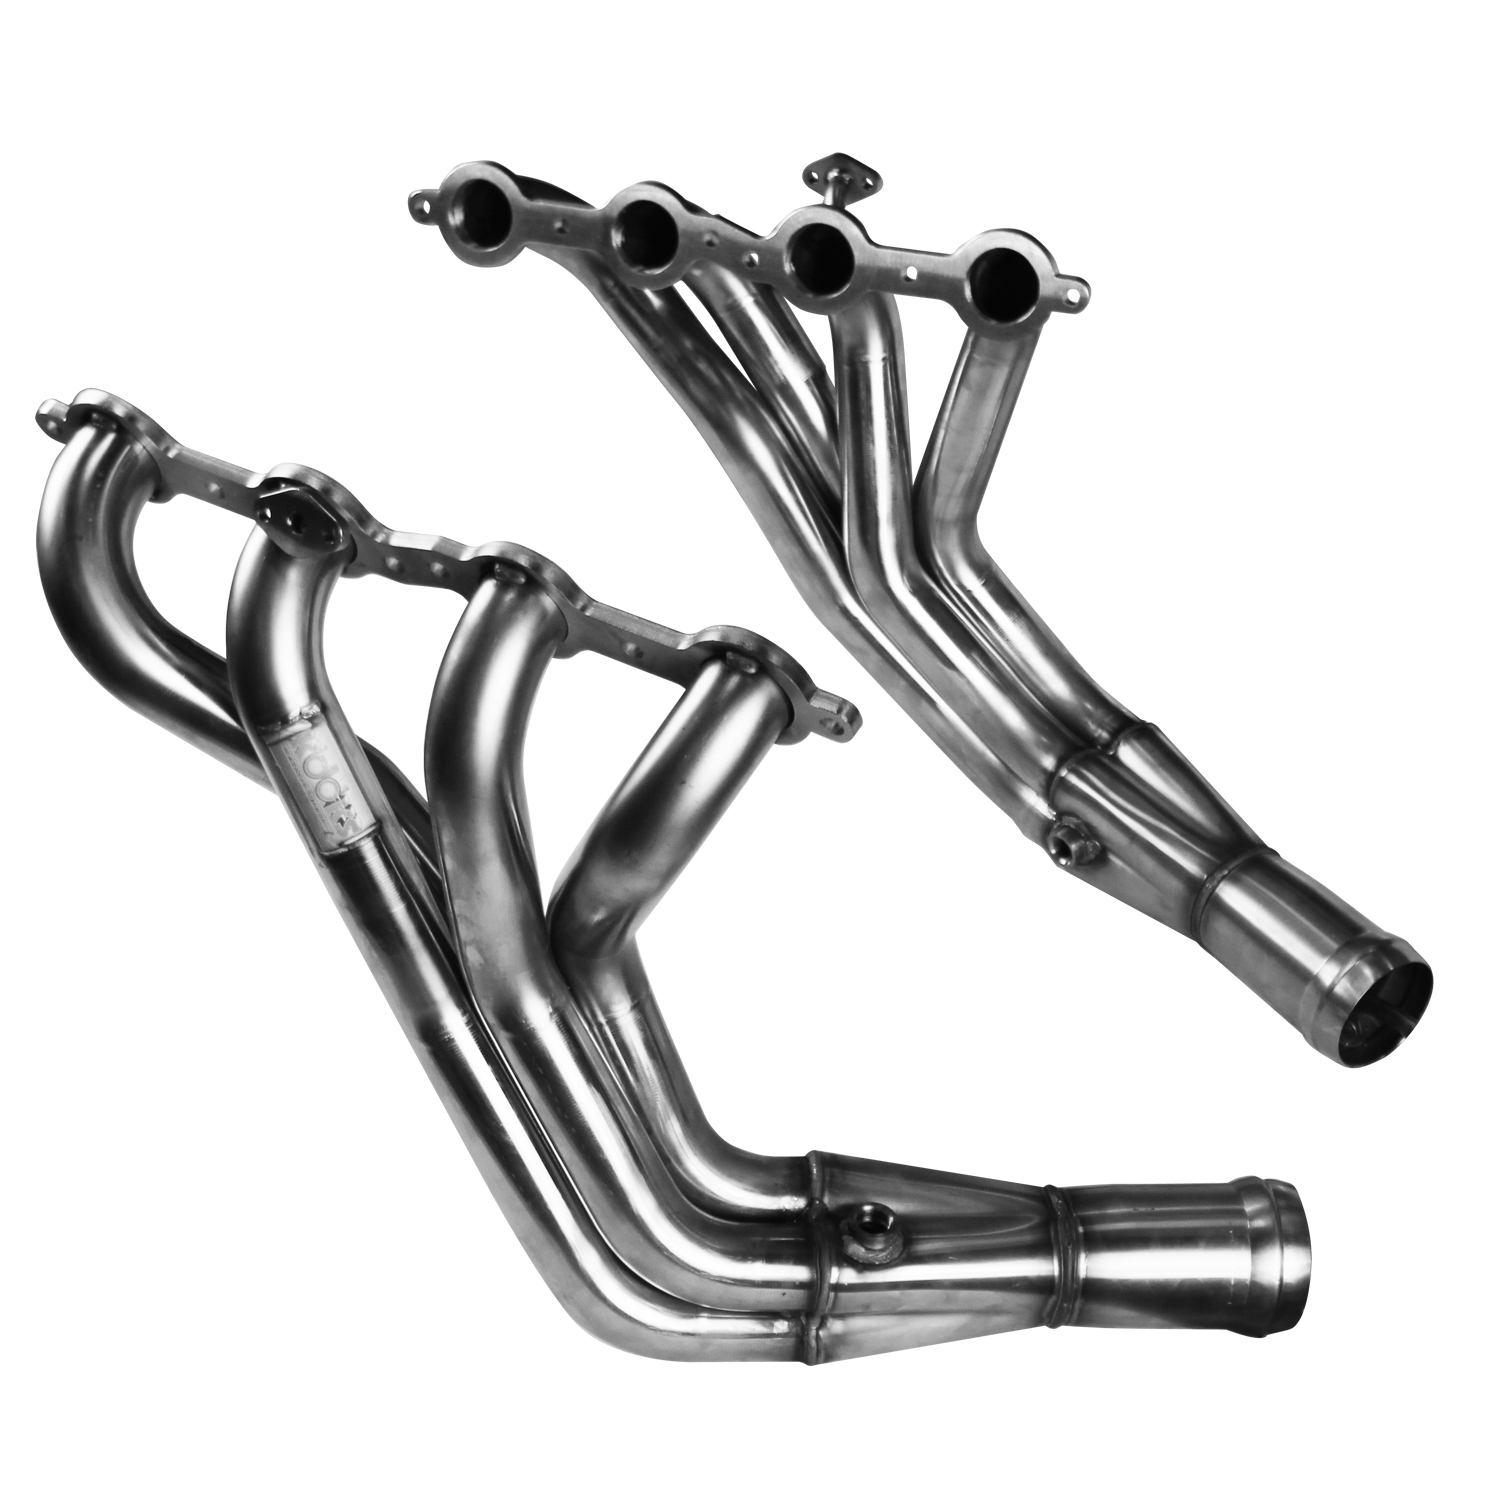 Stainless Steel Headers Street Version 1.875 x 3" Long Tube 01-04 Corvette C5 LS1/LS6 5.7L w/Air Tubes And O2 Fittings w/Merge C